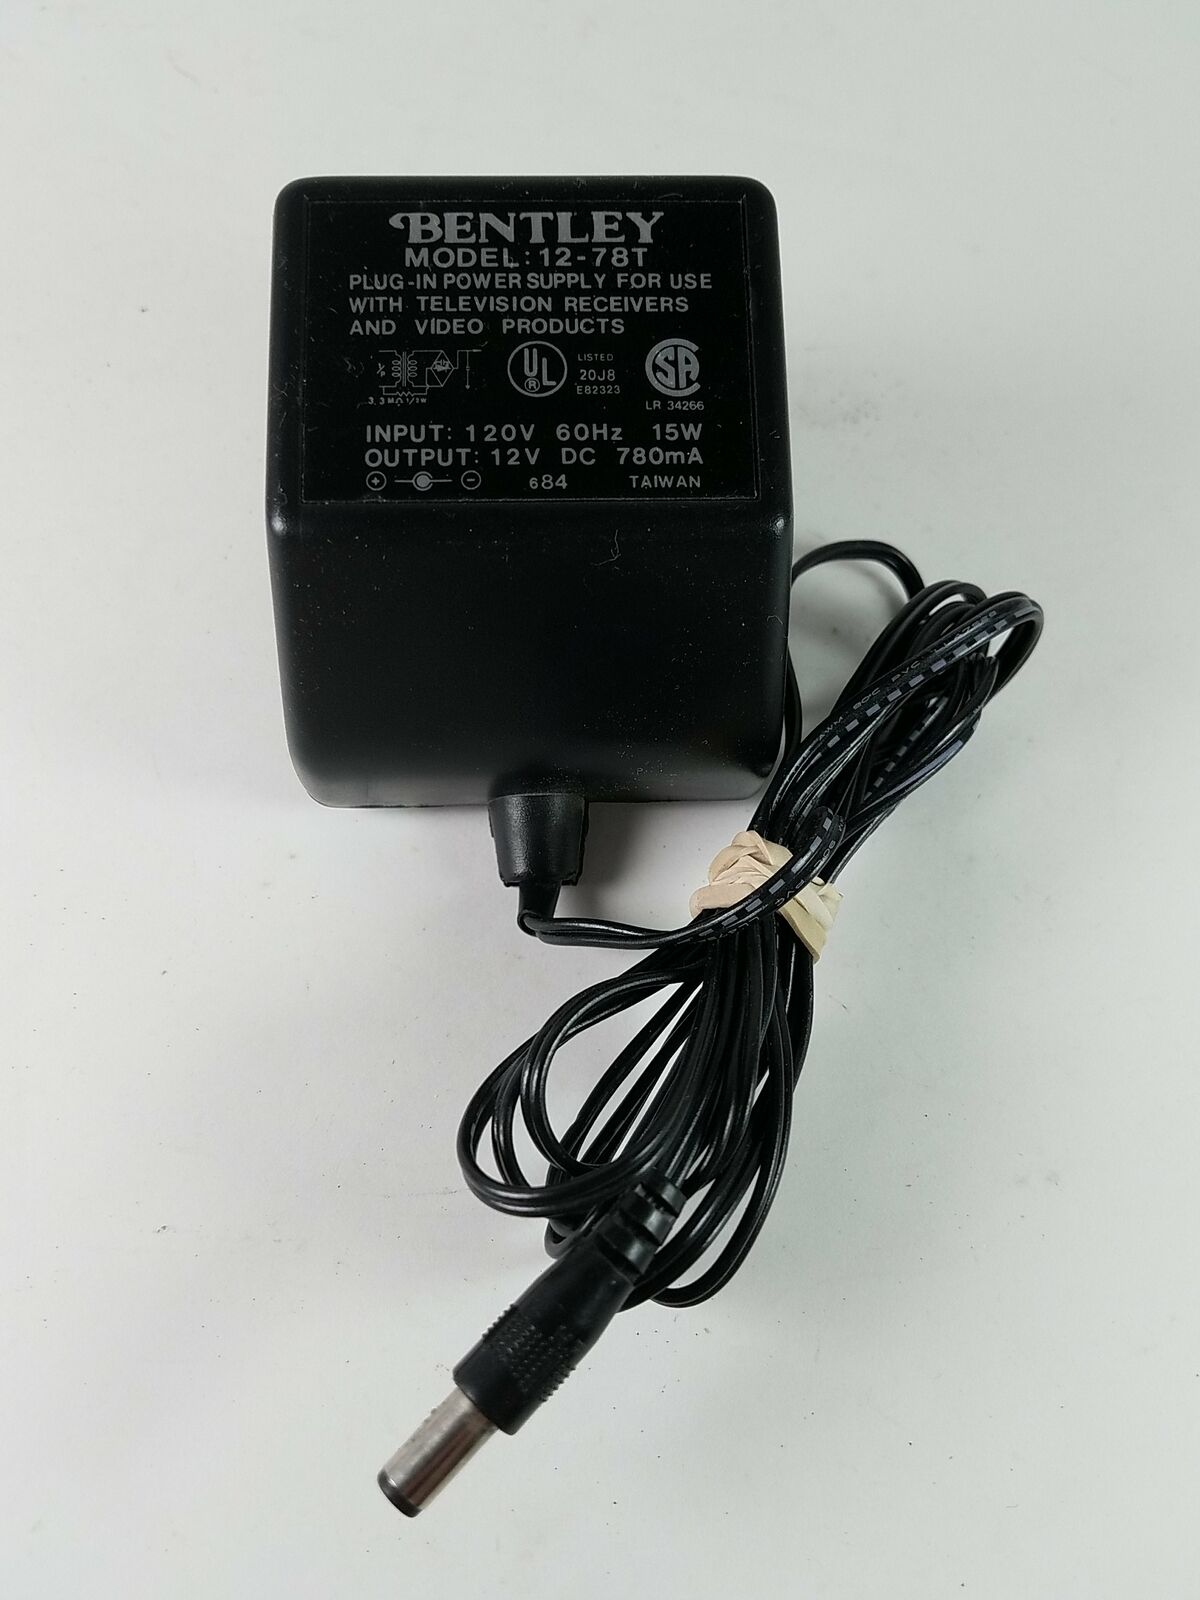 *Brand NEW*12VDC 780mA AC DC ADAPTHE Bentley 12-78T Power Supply